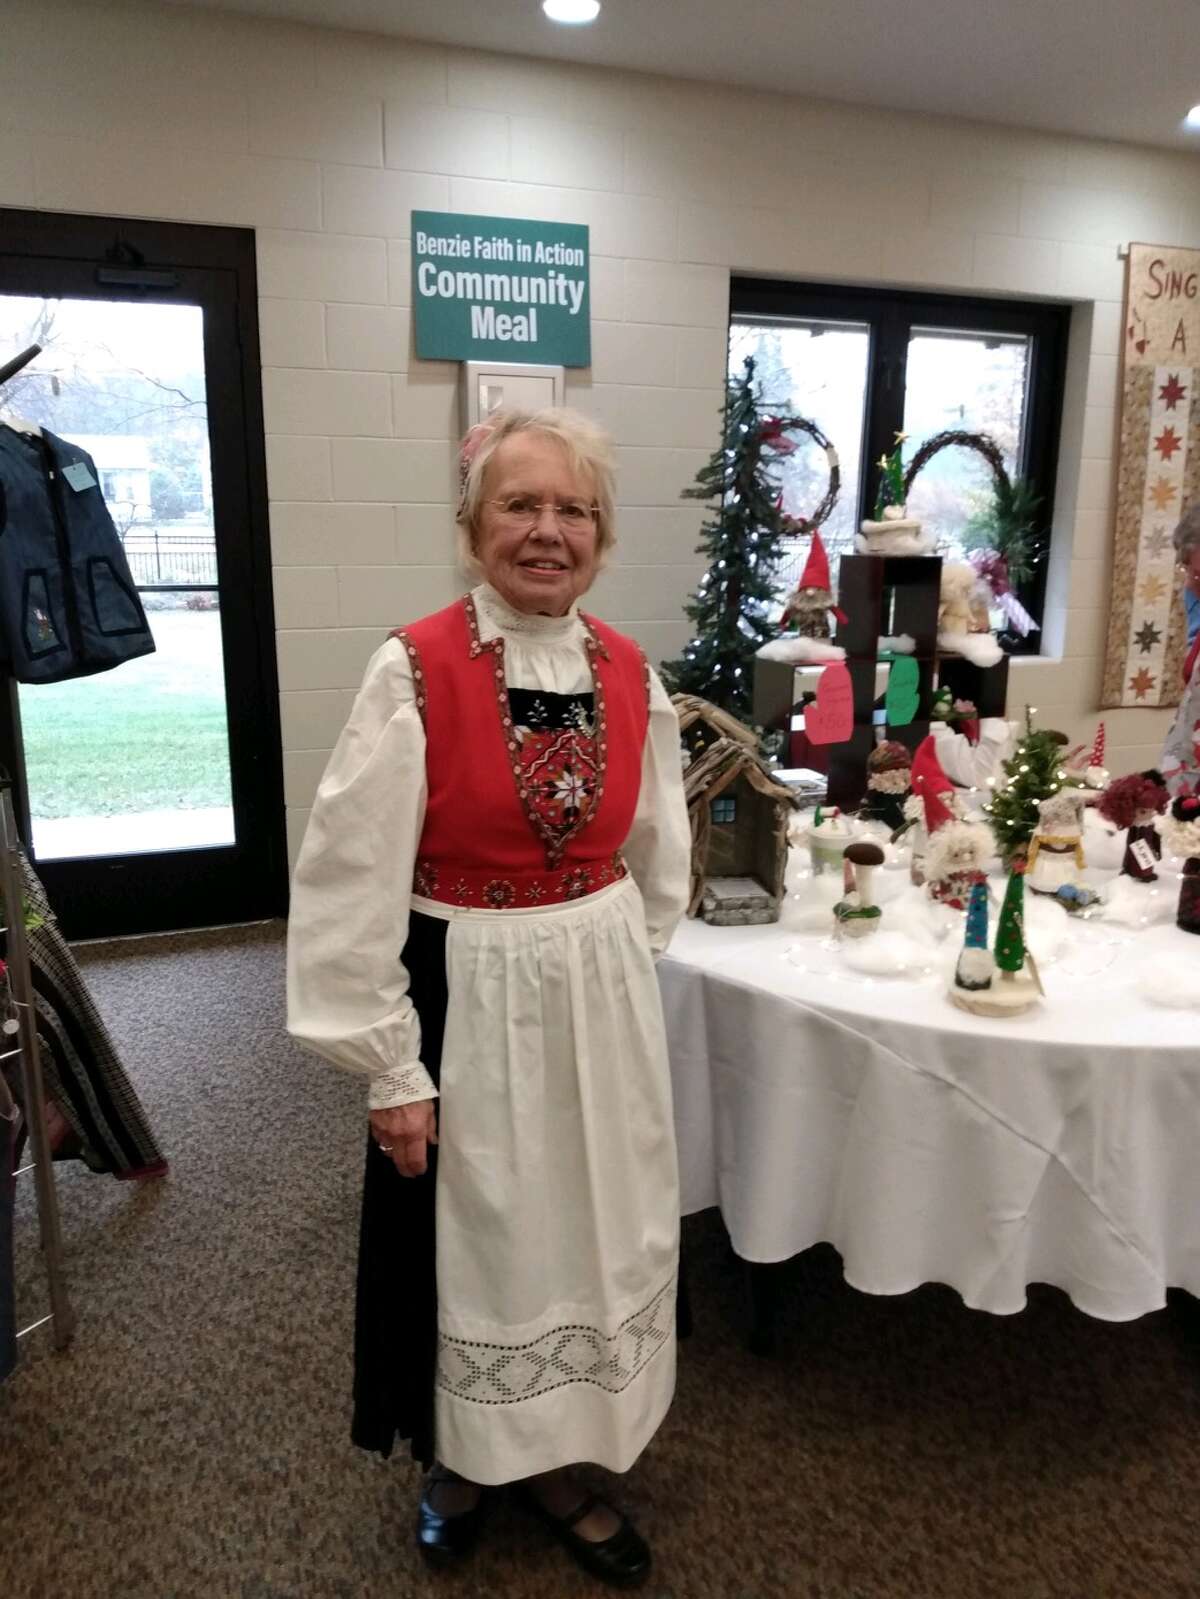 Sharon Ericksen McKinley plans to share how her family and others celebrated past and present Norwegian heritage with Yuletide traditions, at an upcoming event. 